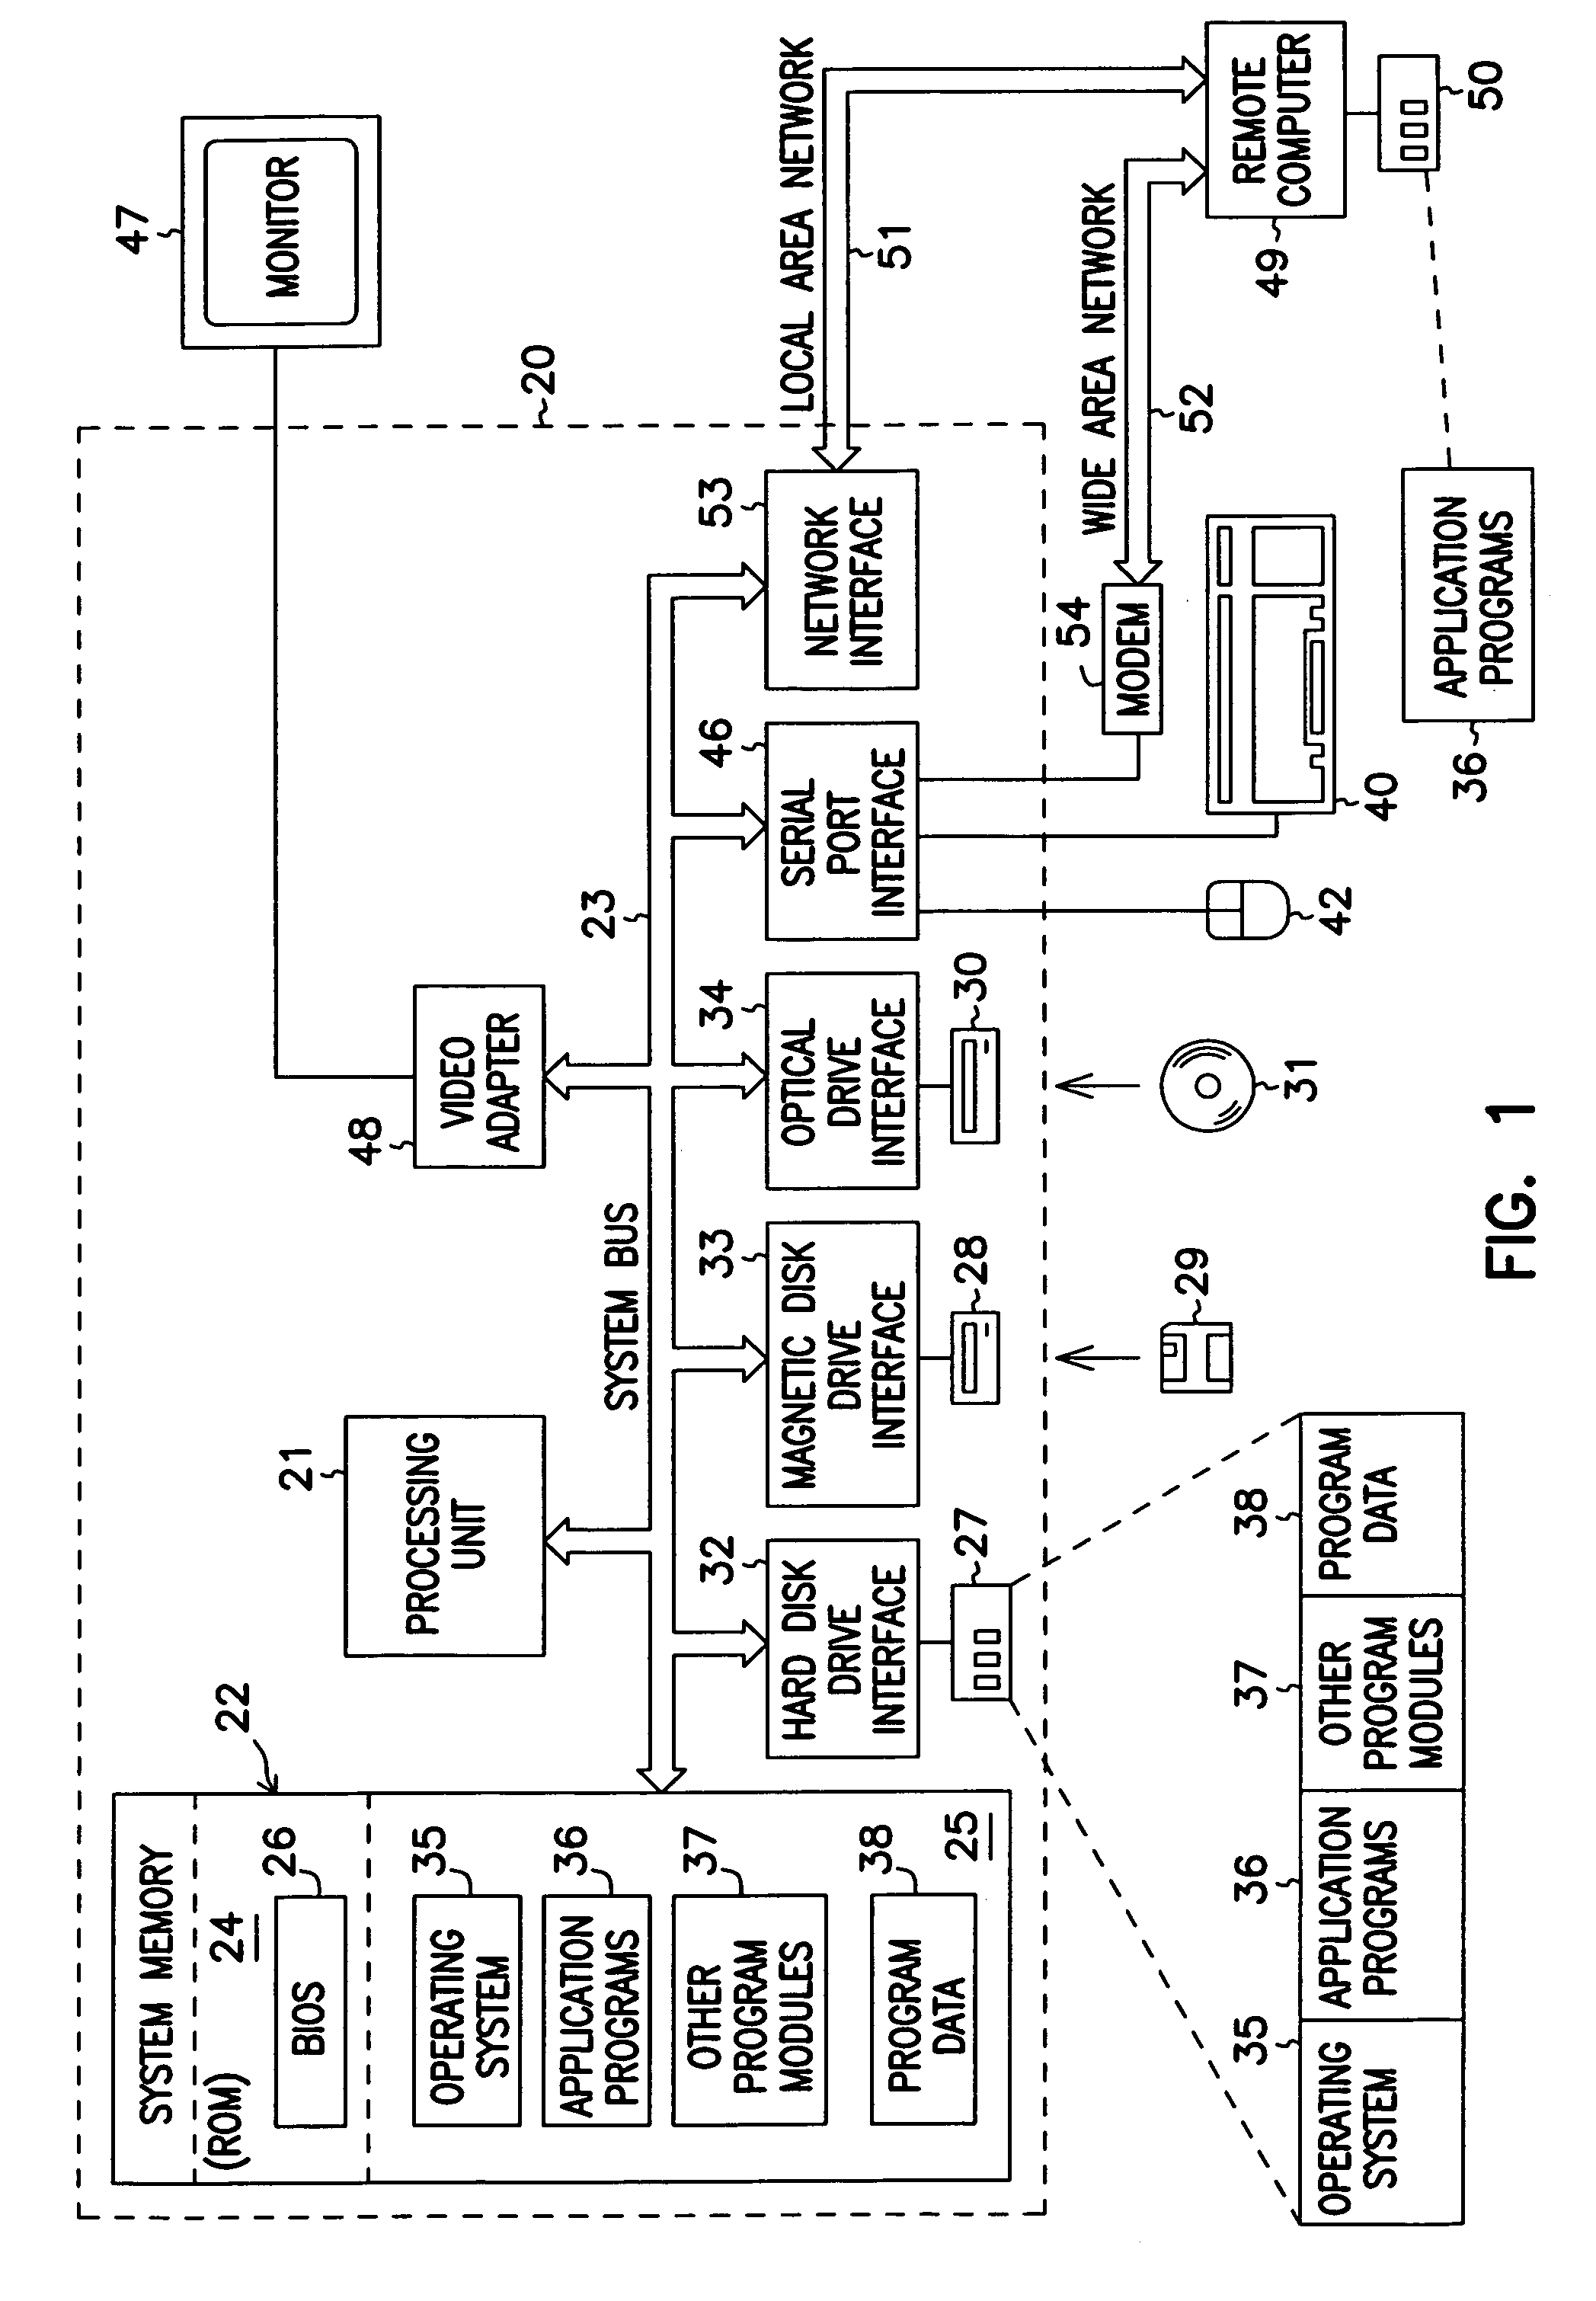 Scalable computing system for managing annotations